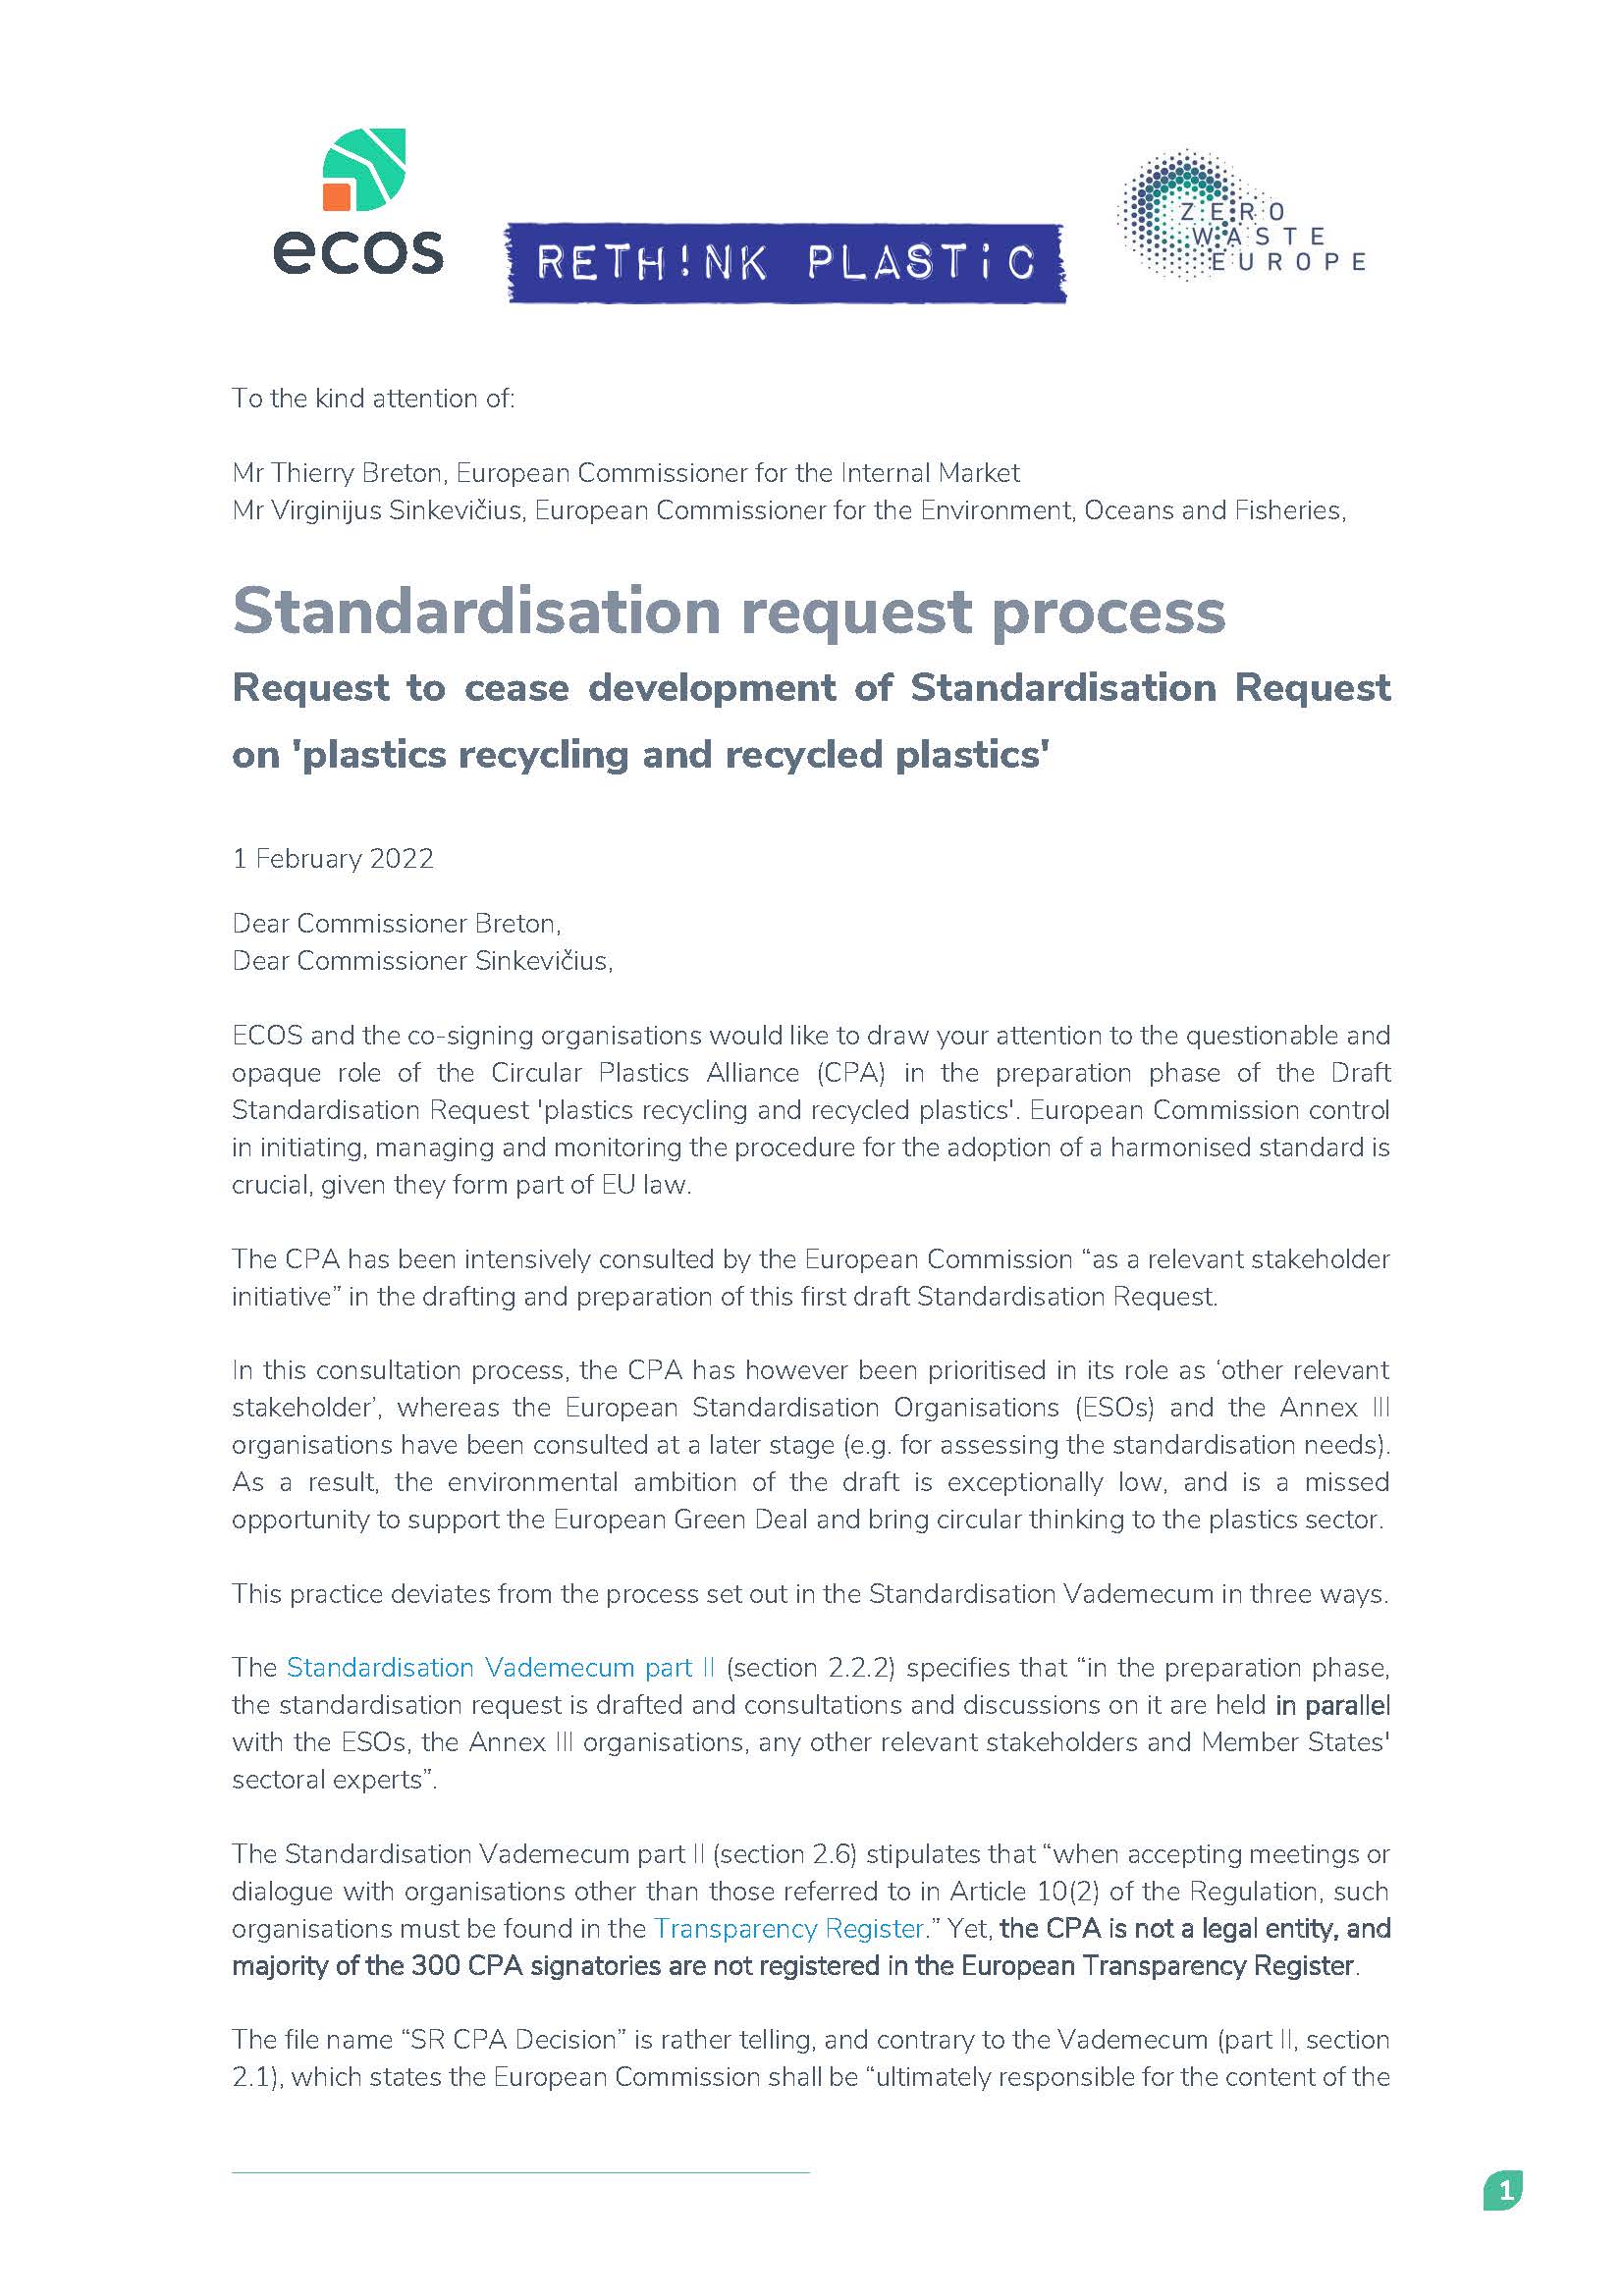 Request to cease development of Standardisation Request on ‘plastics recycling and recycled plastics’